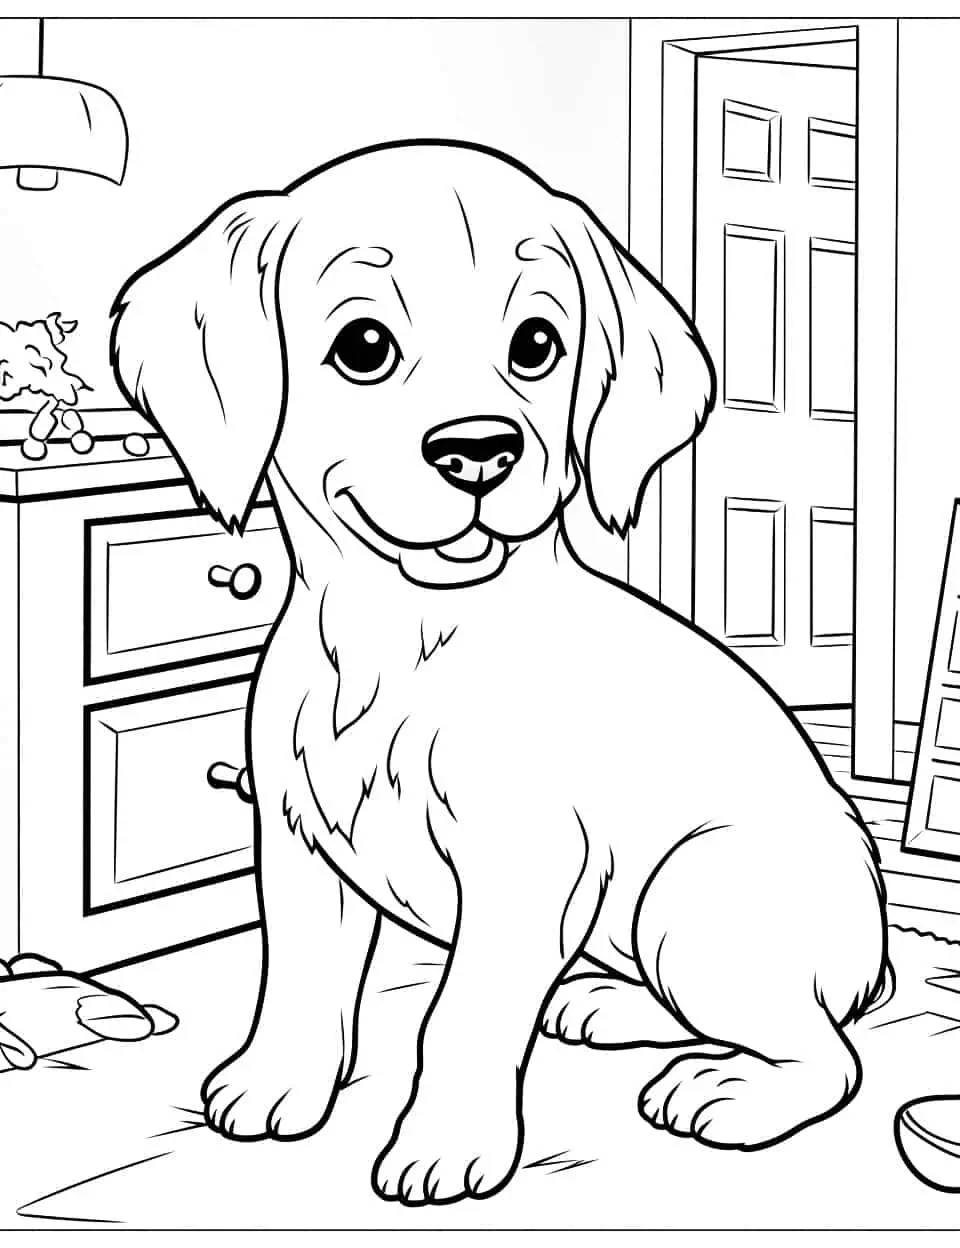 Life of a Golden Retriever Dog Coloring Page - A Golden Retriever, sitting on the floor waiting for his owner to come home.